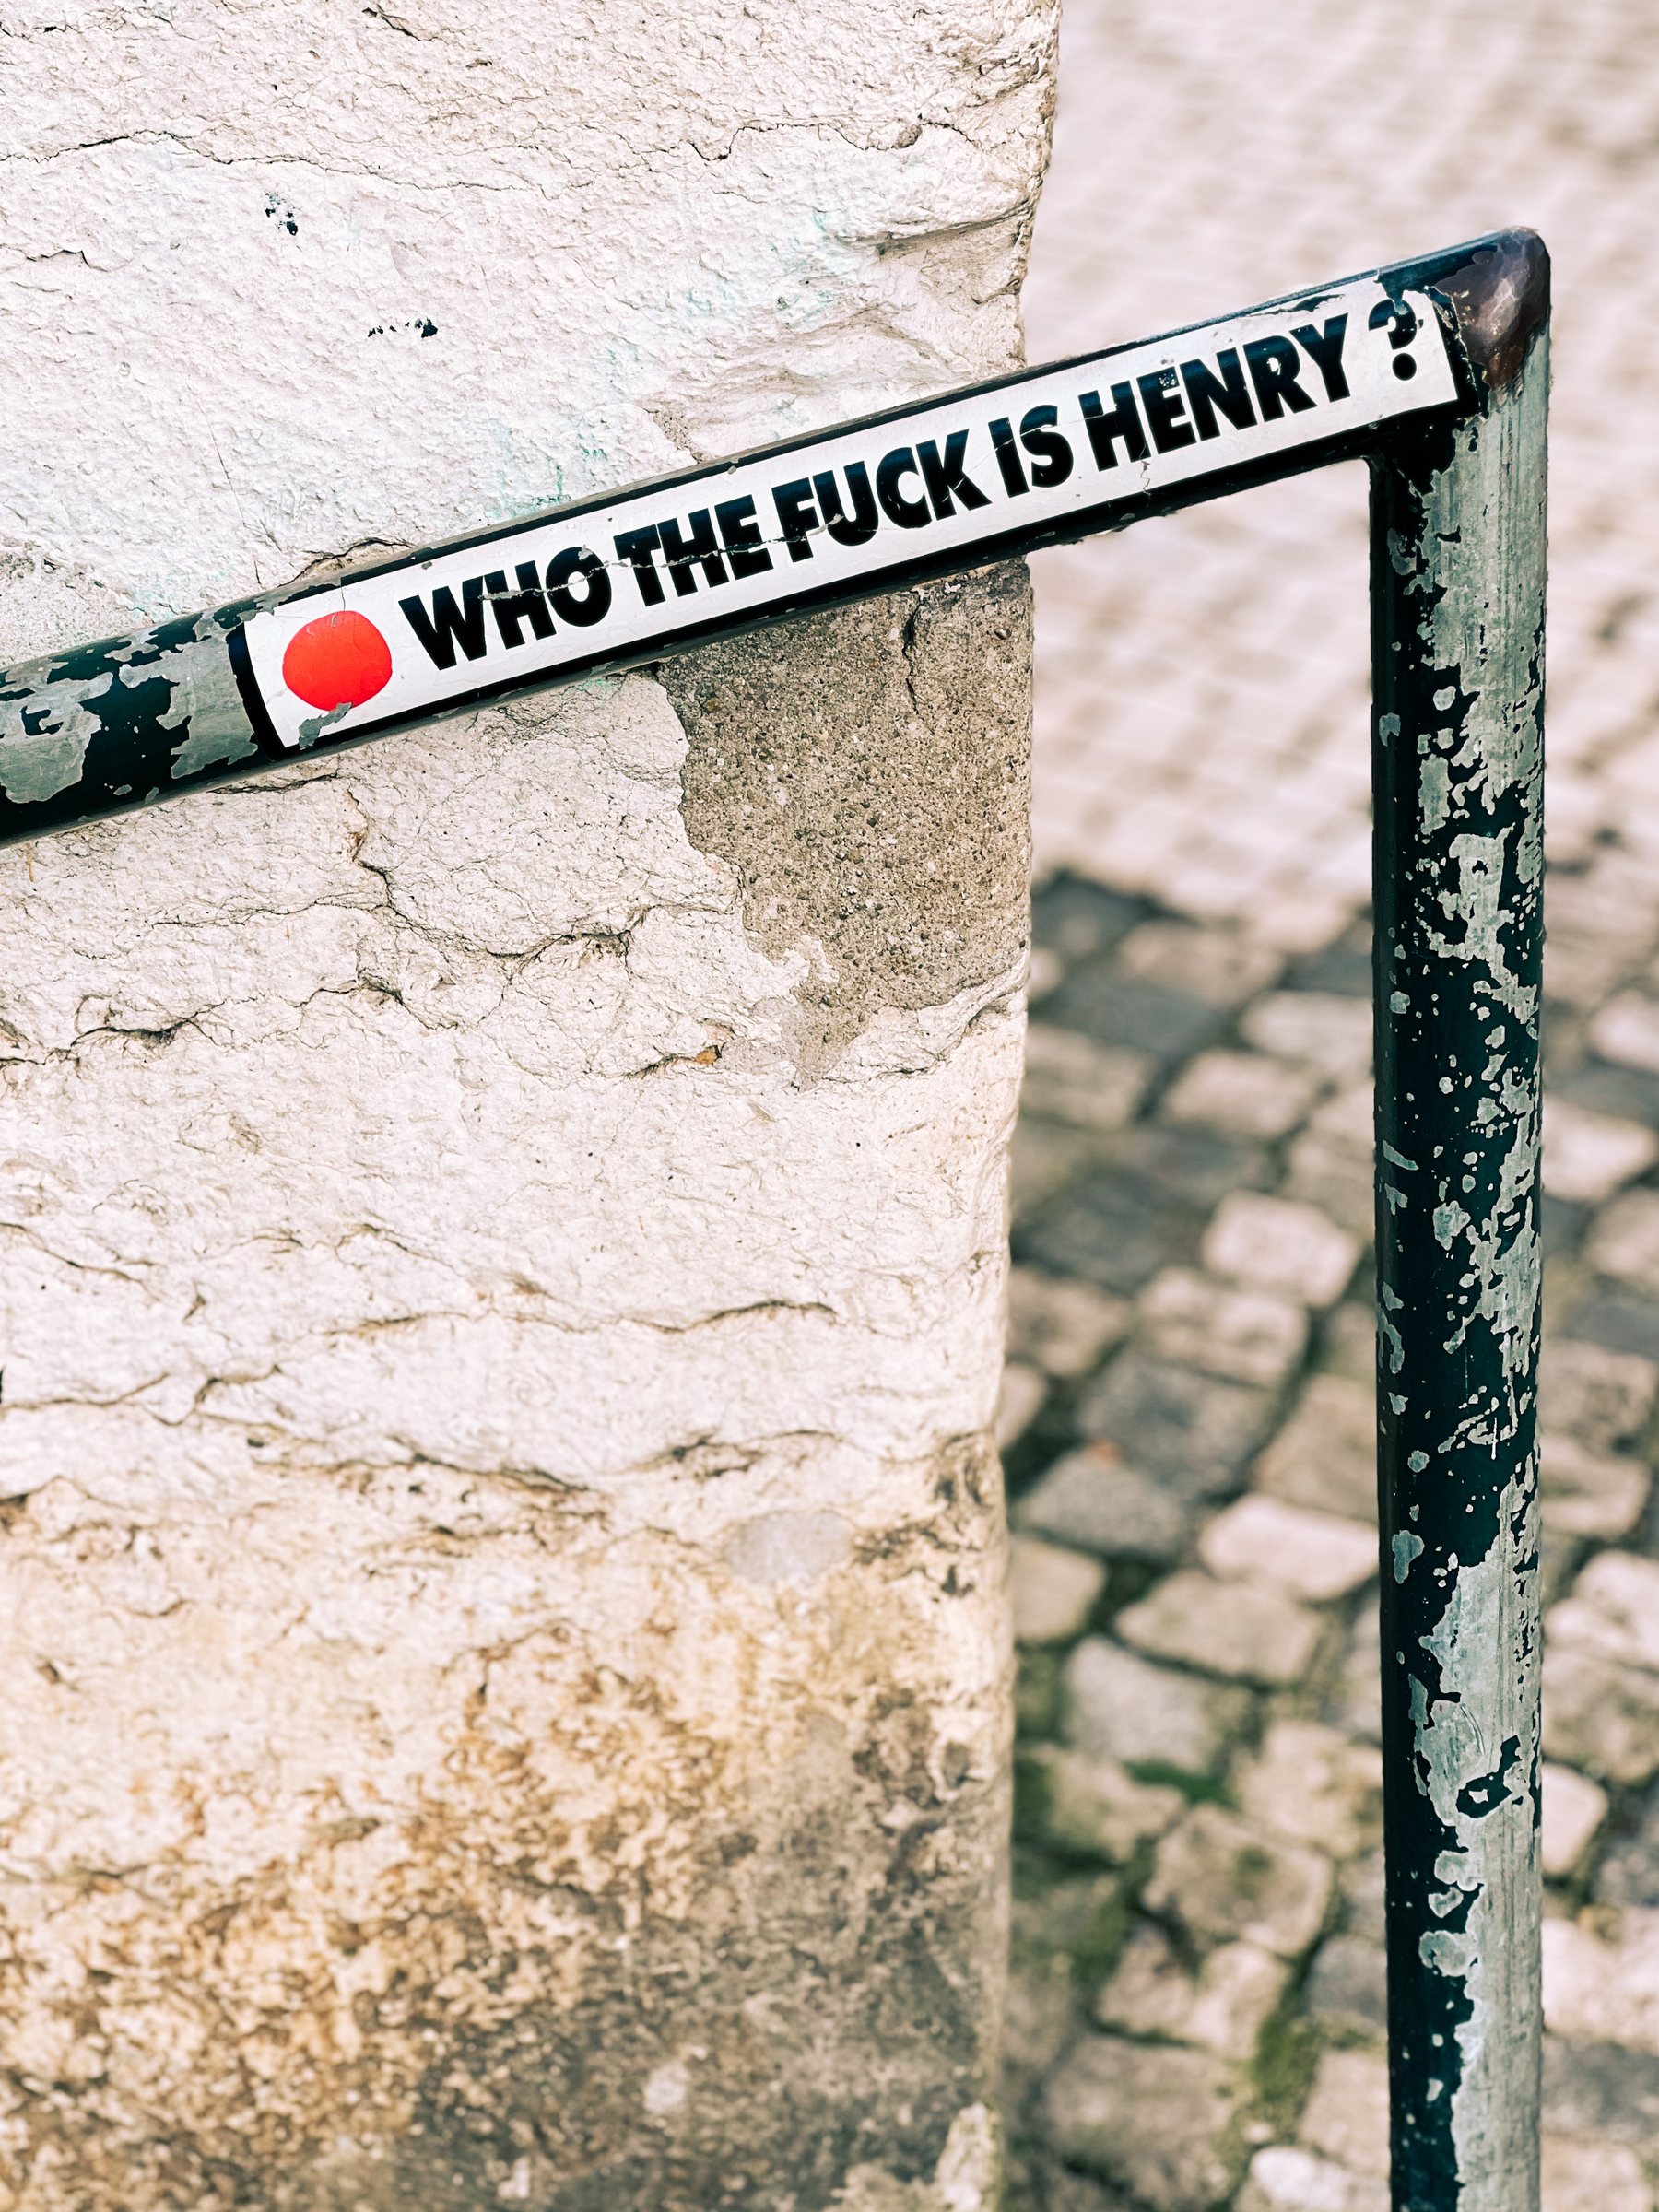 A metal barrier with a sticker that reads &ldquo;WHO THE F*** IS HENRY?&rdquo; affixed to it.